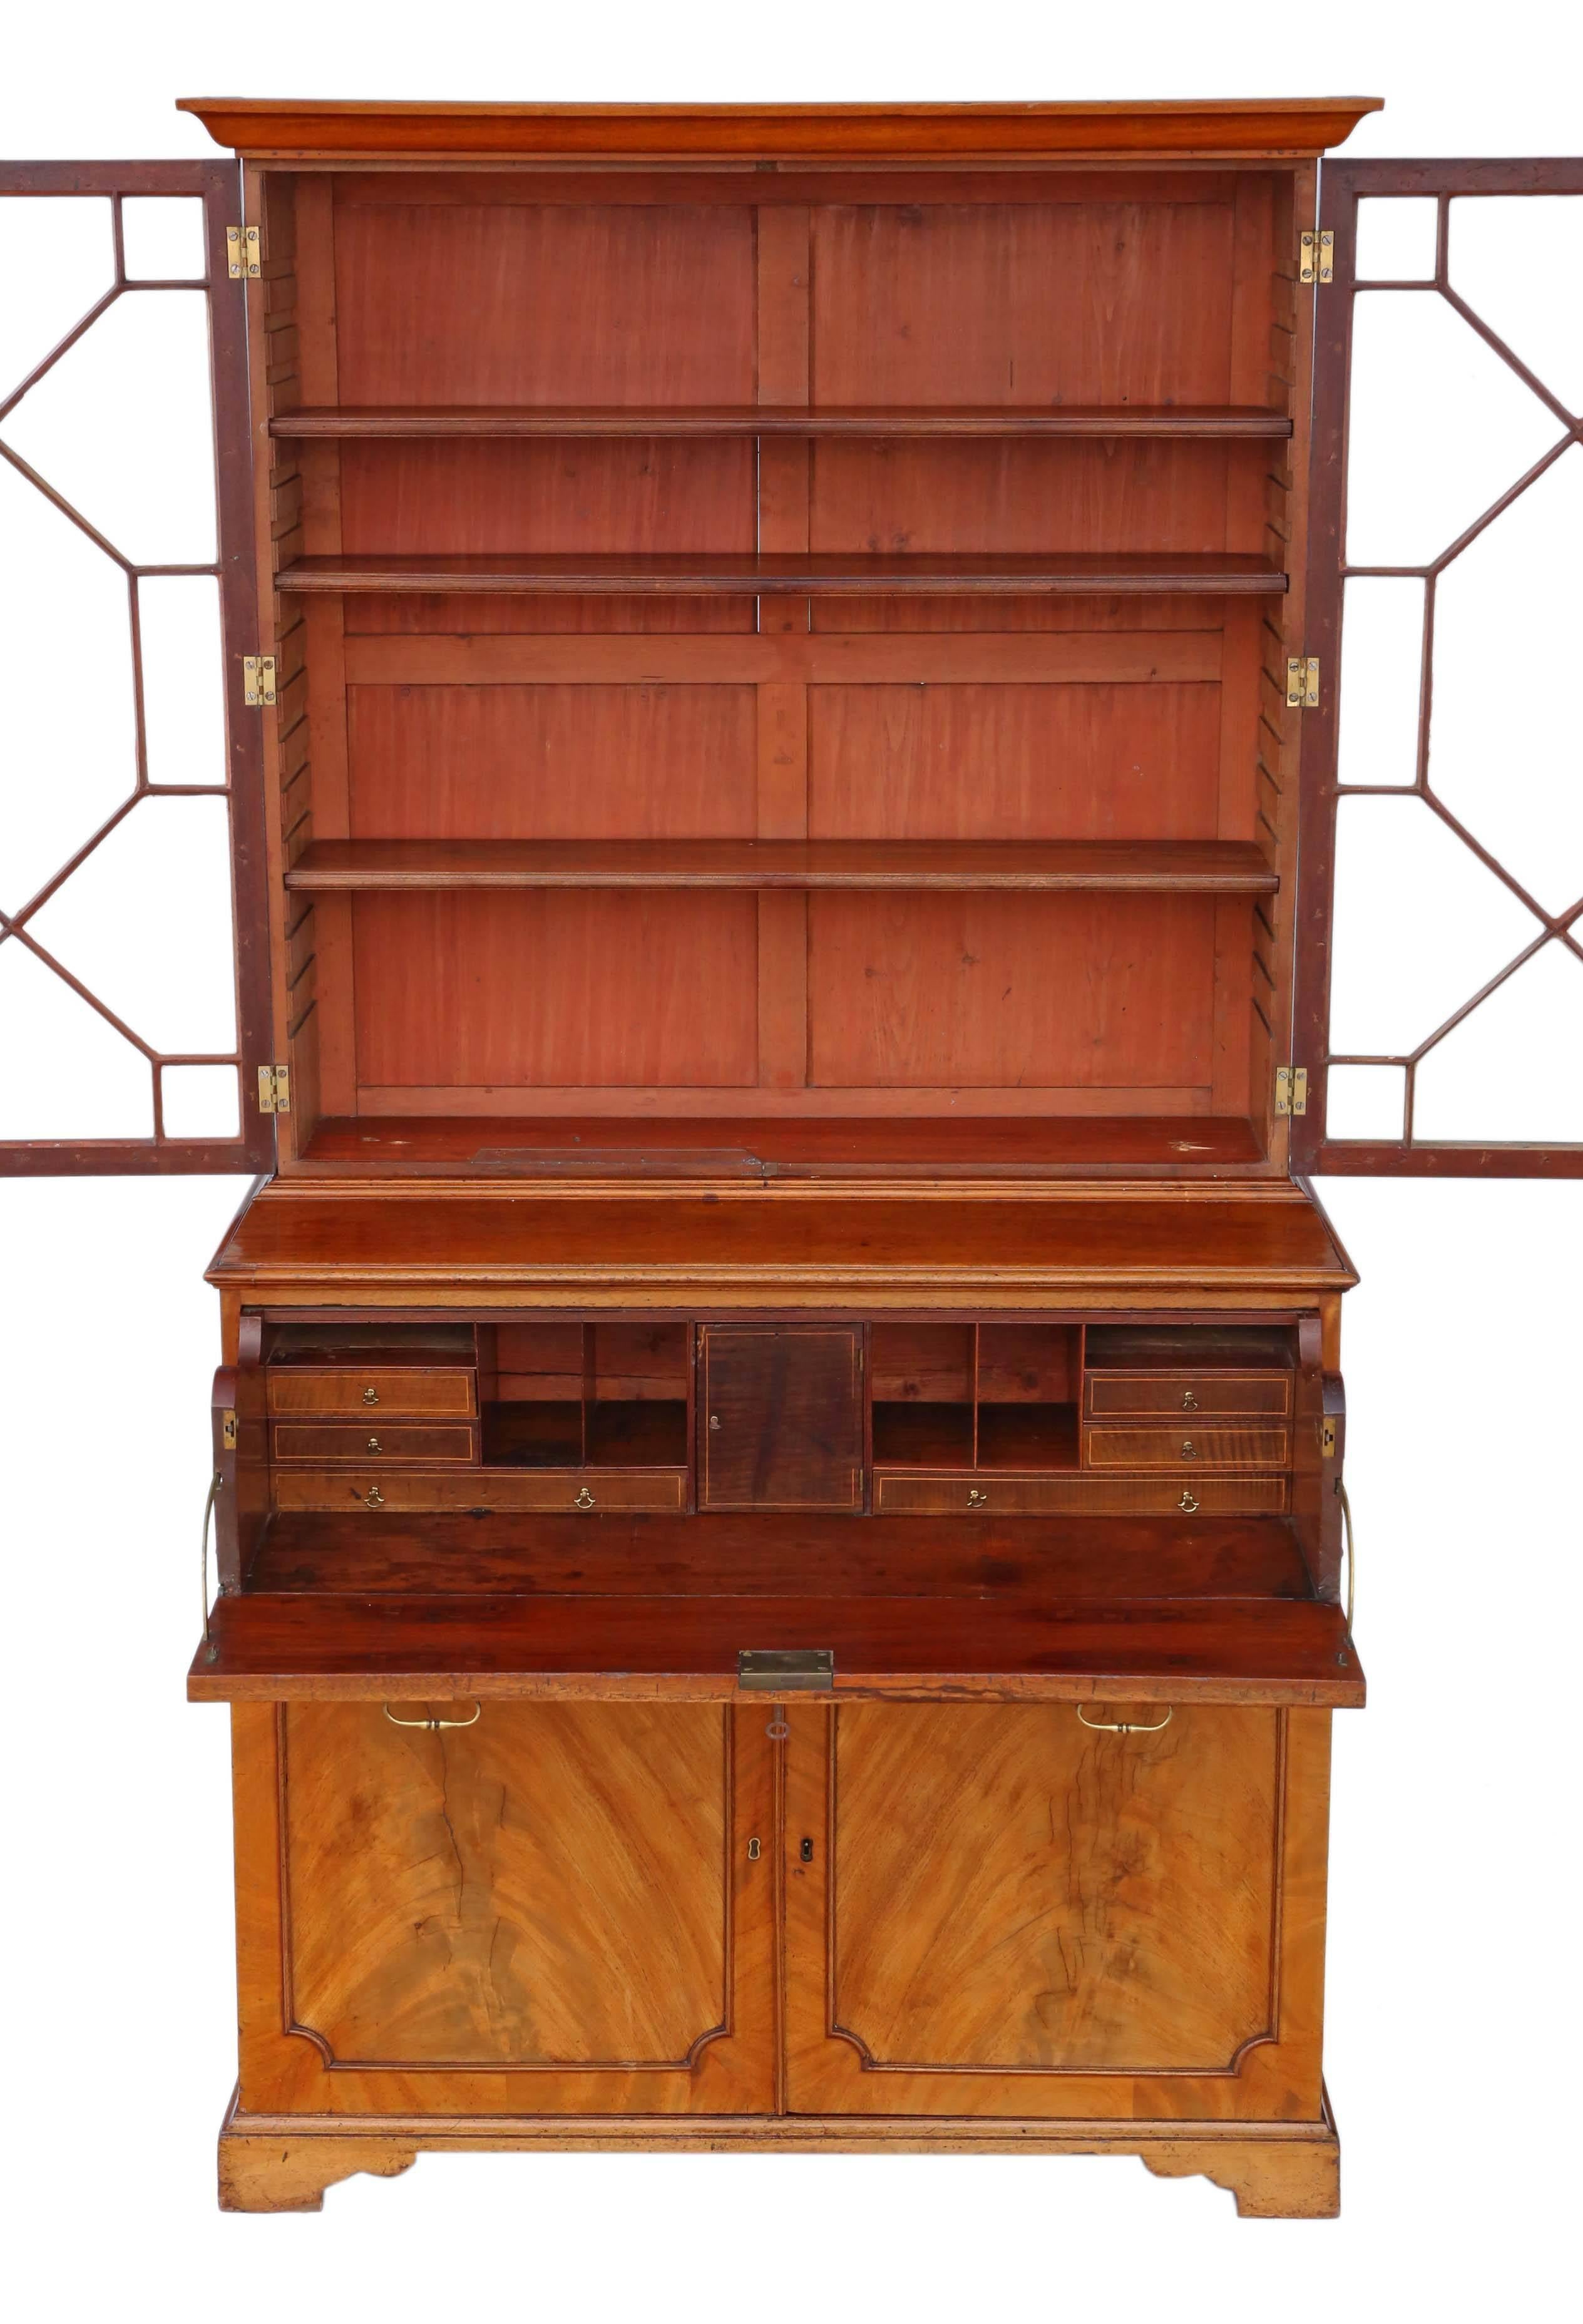 Antique Georgian mahogany secretaire bookcase, circa 1800.

Solid and strong, with no loose joints. Full of age, character and charm. Great patina and a lovely light mahogany color.

Would look great in the right location! We have keys, but not